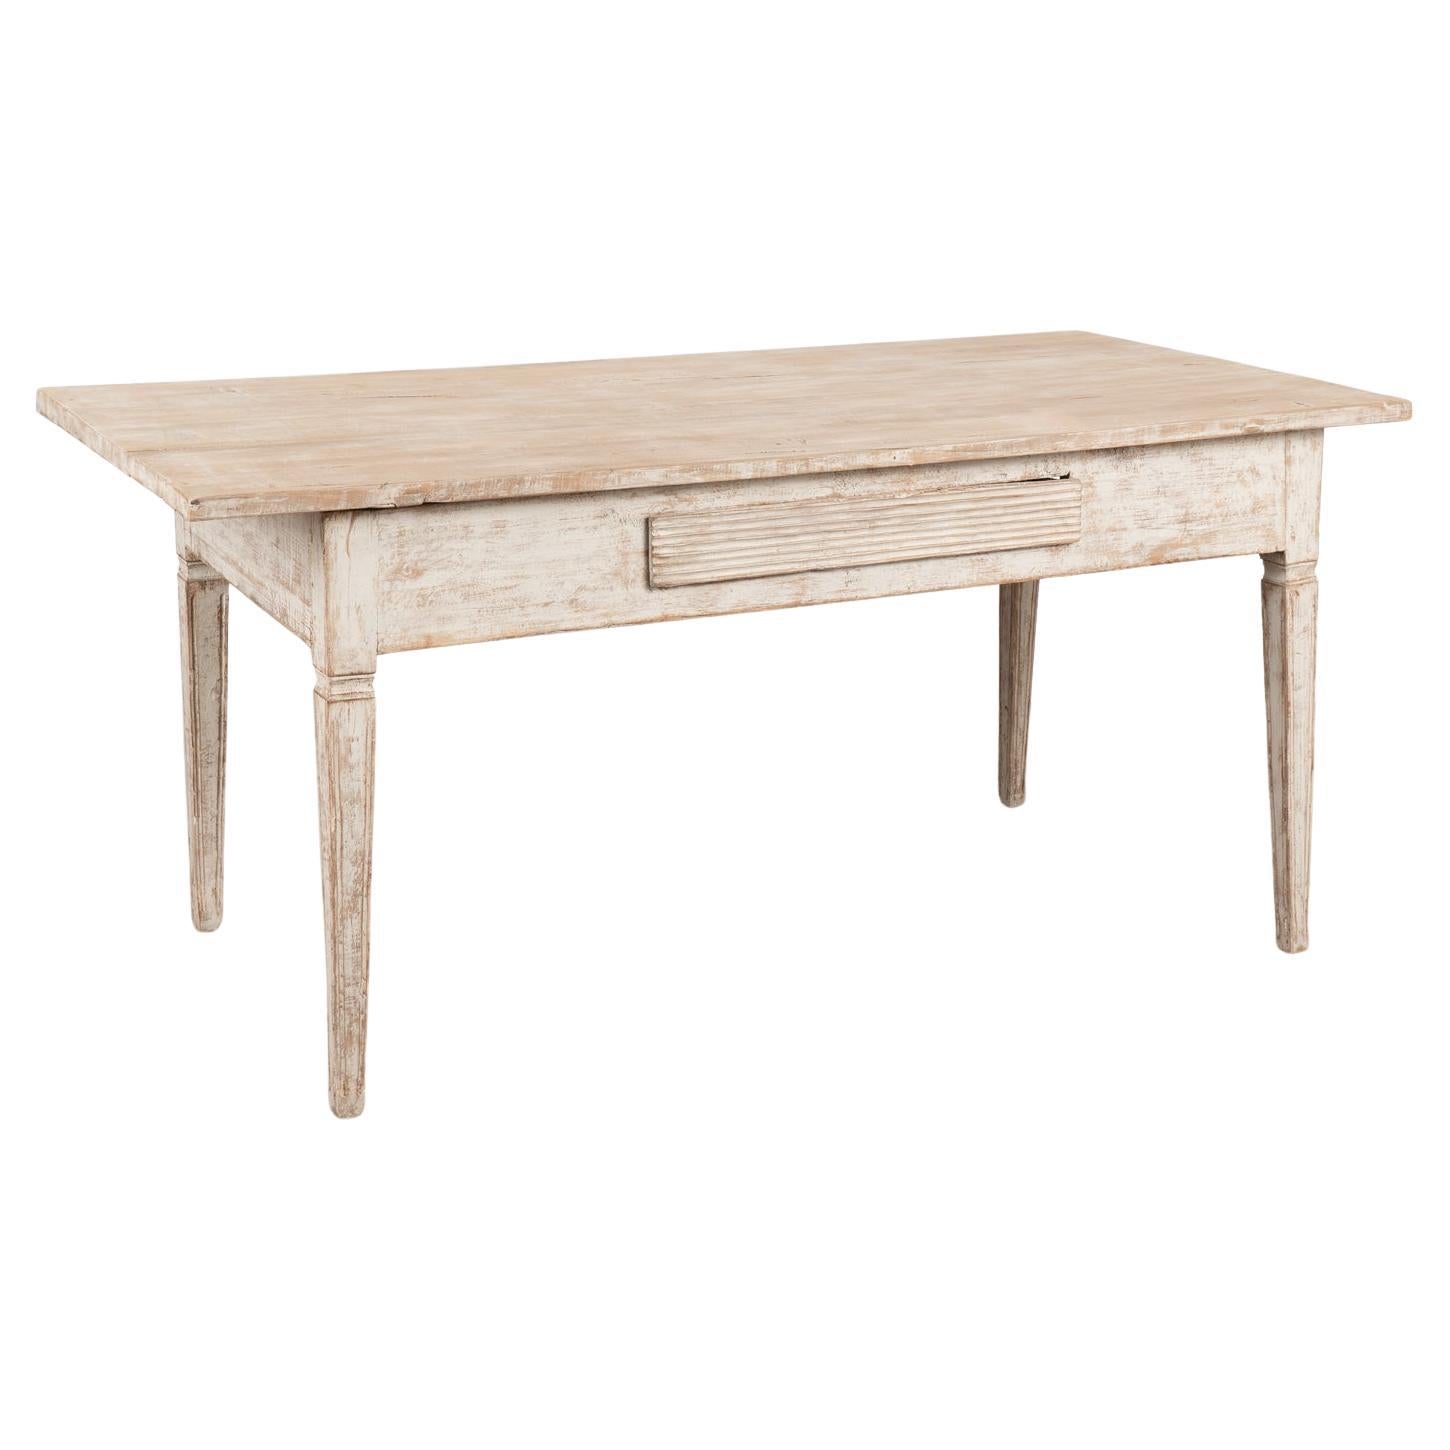 White Painted Gustavian Style Table Writing Desk With One Drawer, circa 1860-80 For Sale